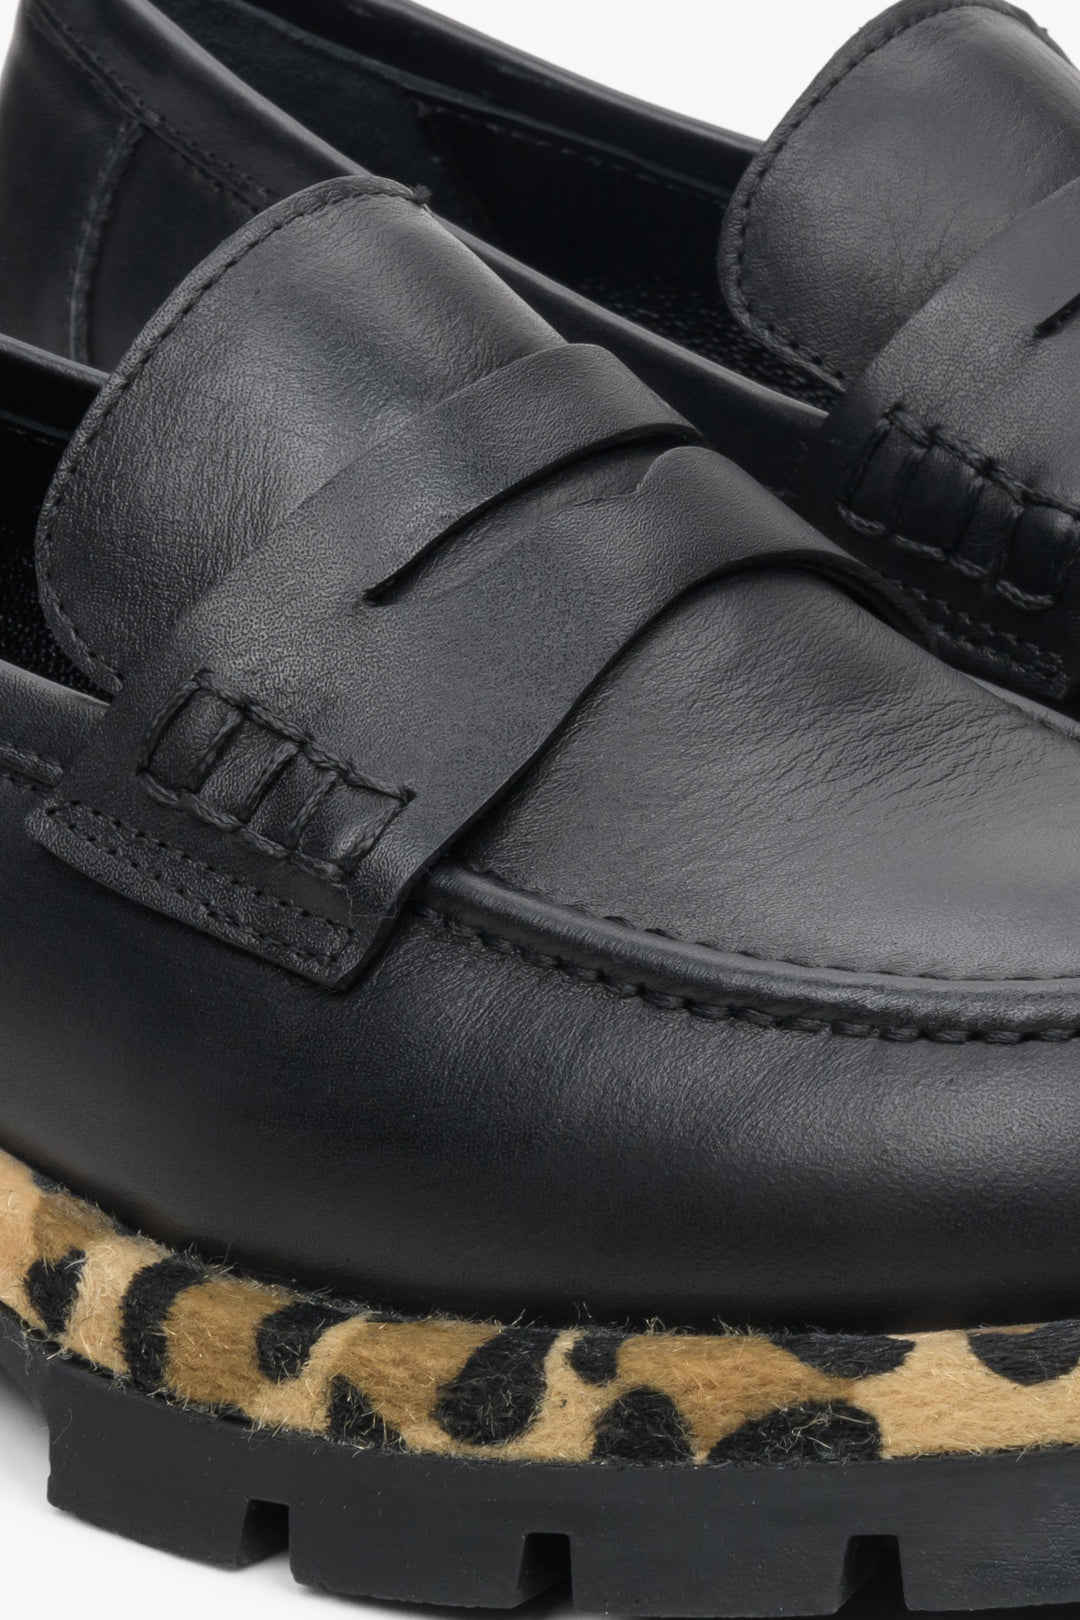 Women's black leather moccasins by Estro - close-up on details.